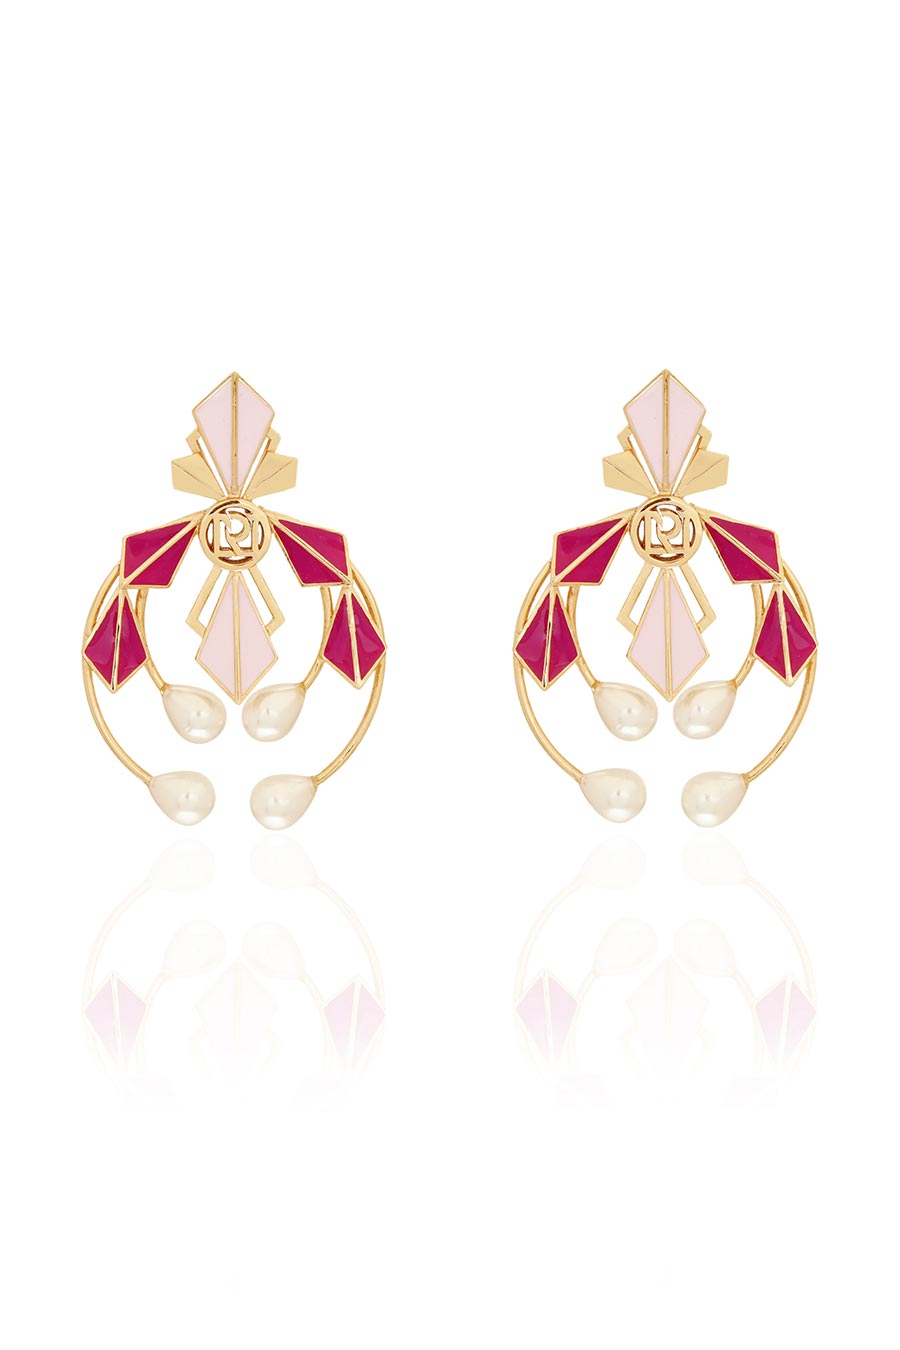 Cynthia Gold Plated Statement Earrings